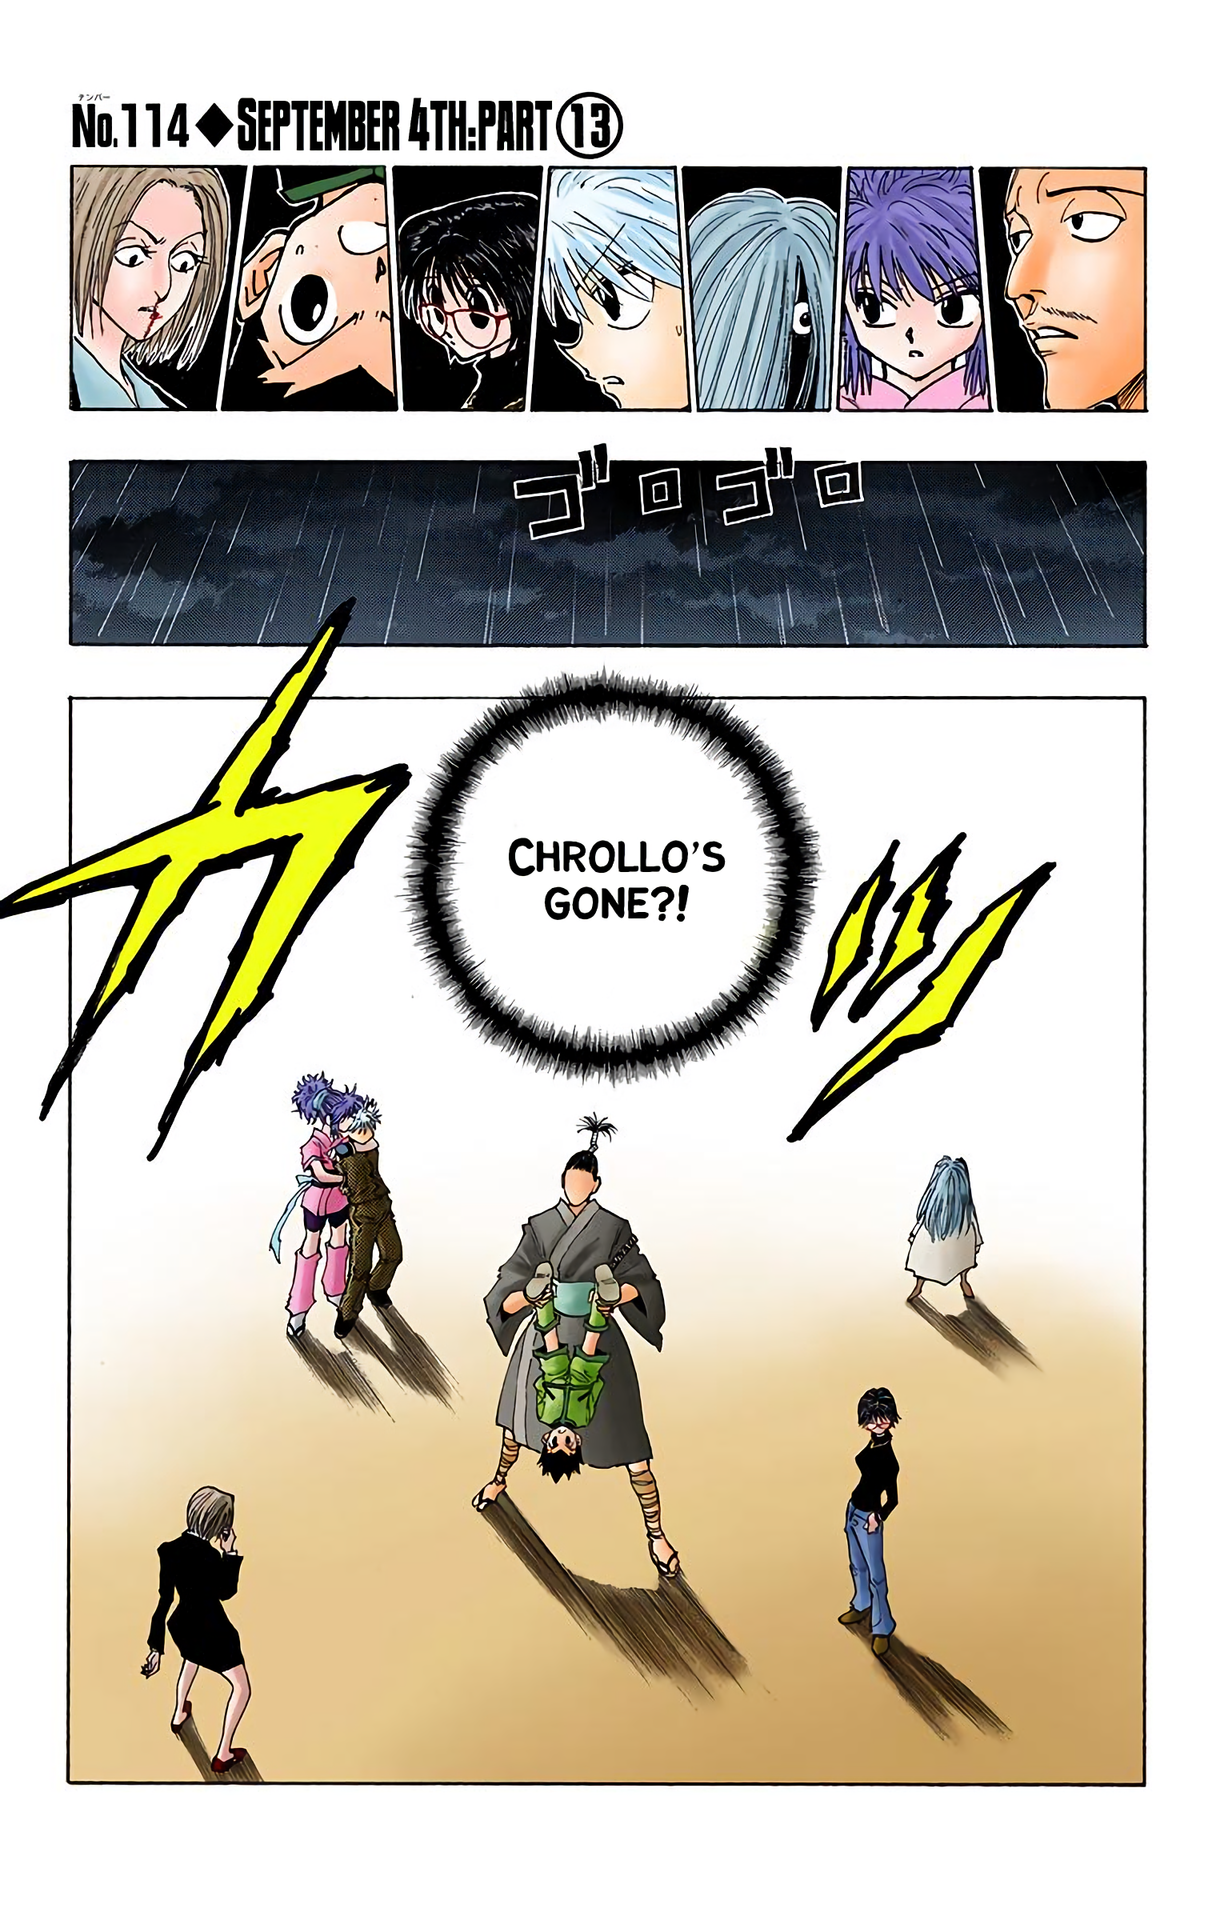 Hunter X Hunter Full Color Vol.12 Chapter 114: September 4Th: Part 13 - Picture 1